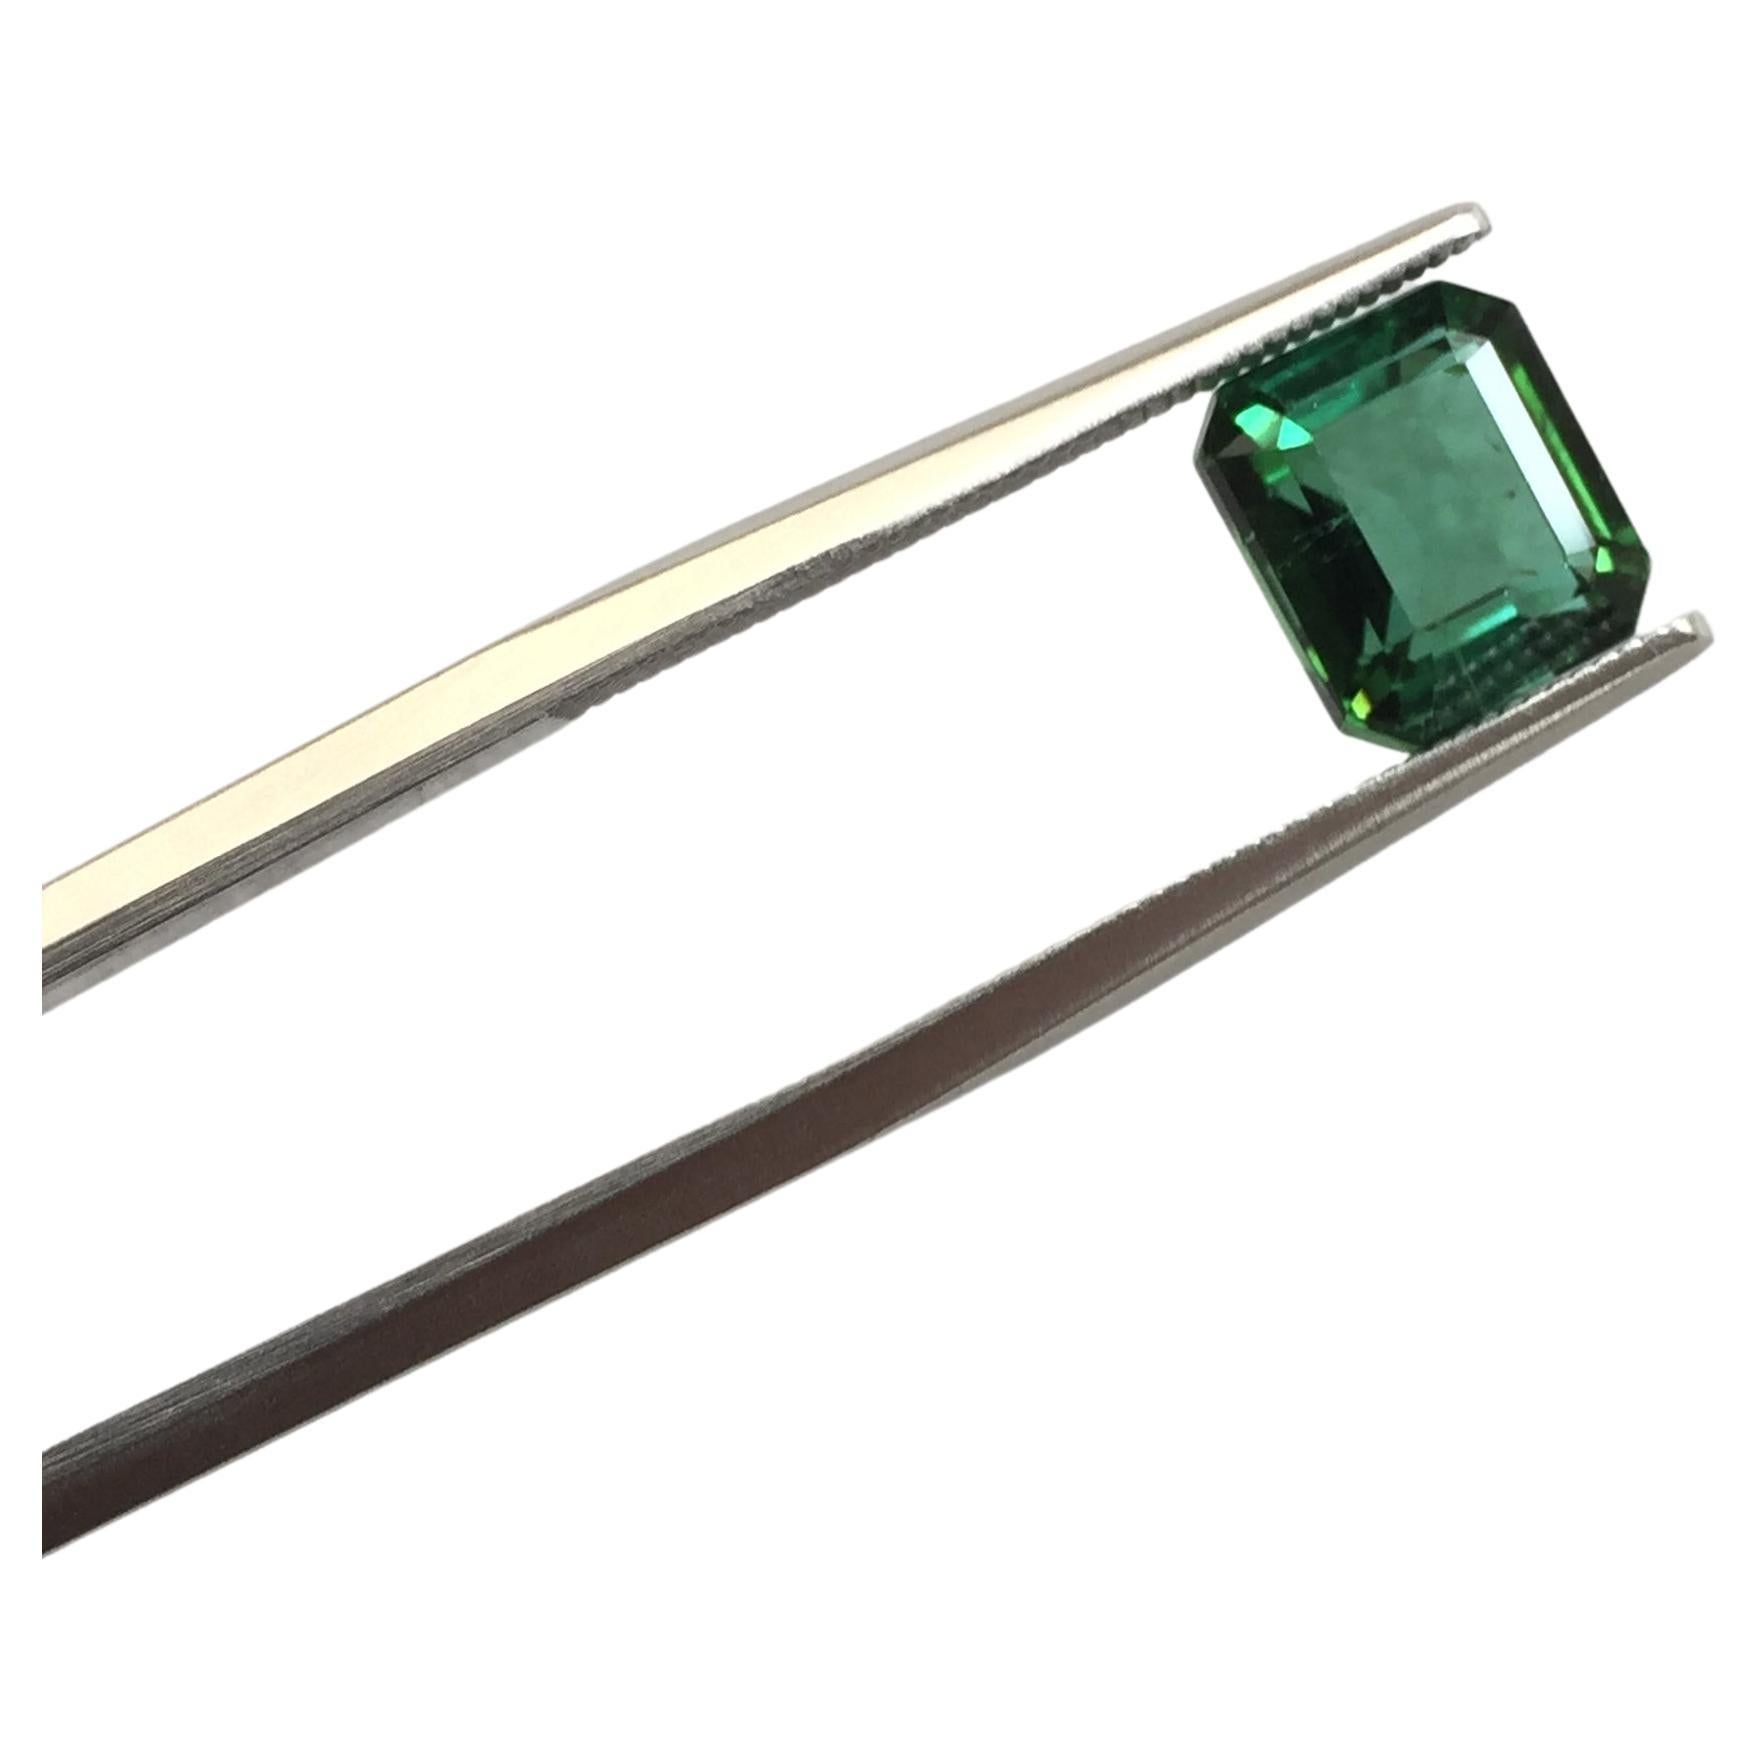 3.13 Carat Green Tourmaline Octagon Cut Gemstone for Fine Jewelry Ring For Sale